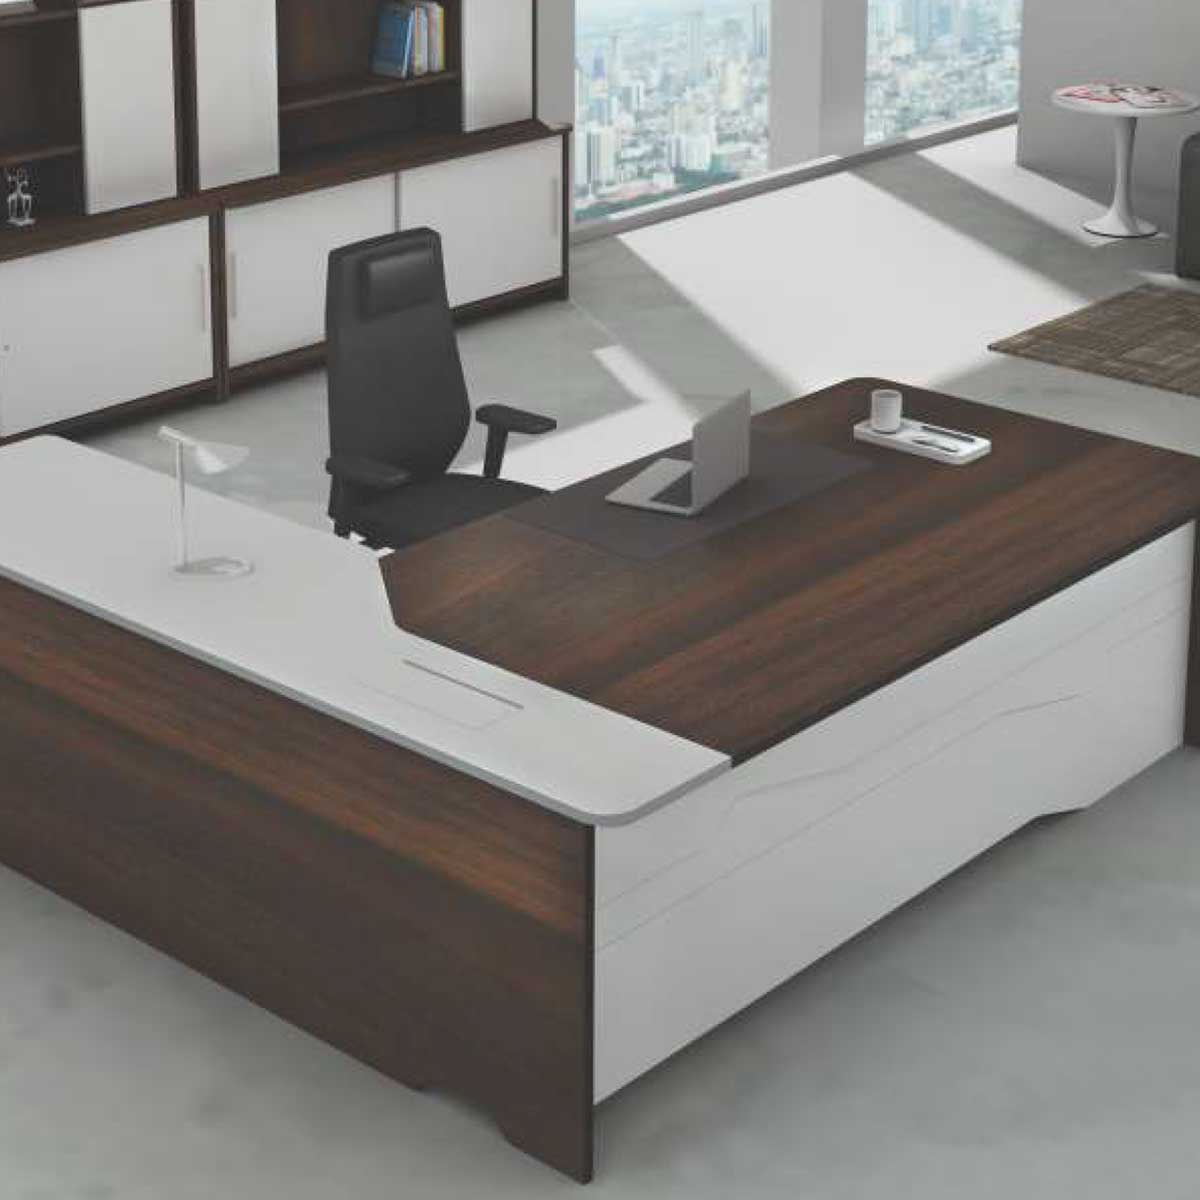 Manager Table Manufacturers, Suppliers in Dwarka Sector 16